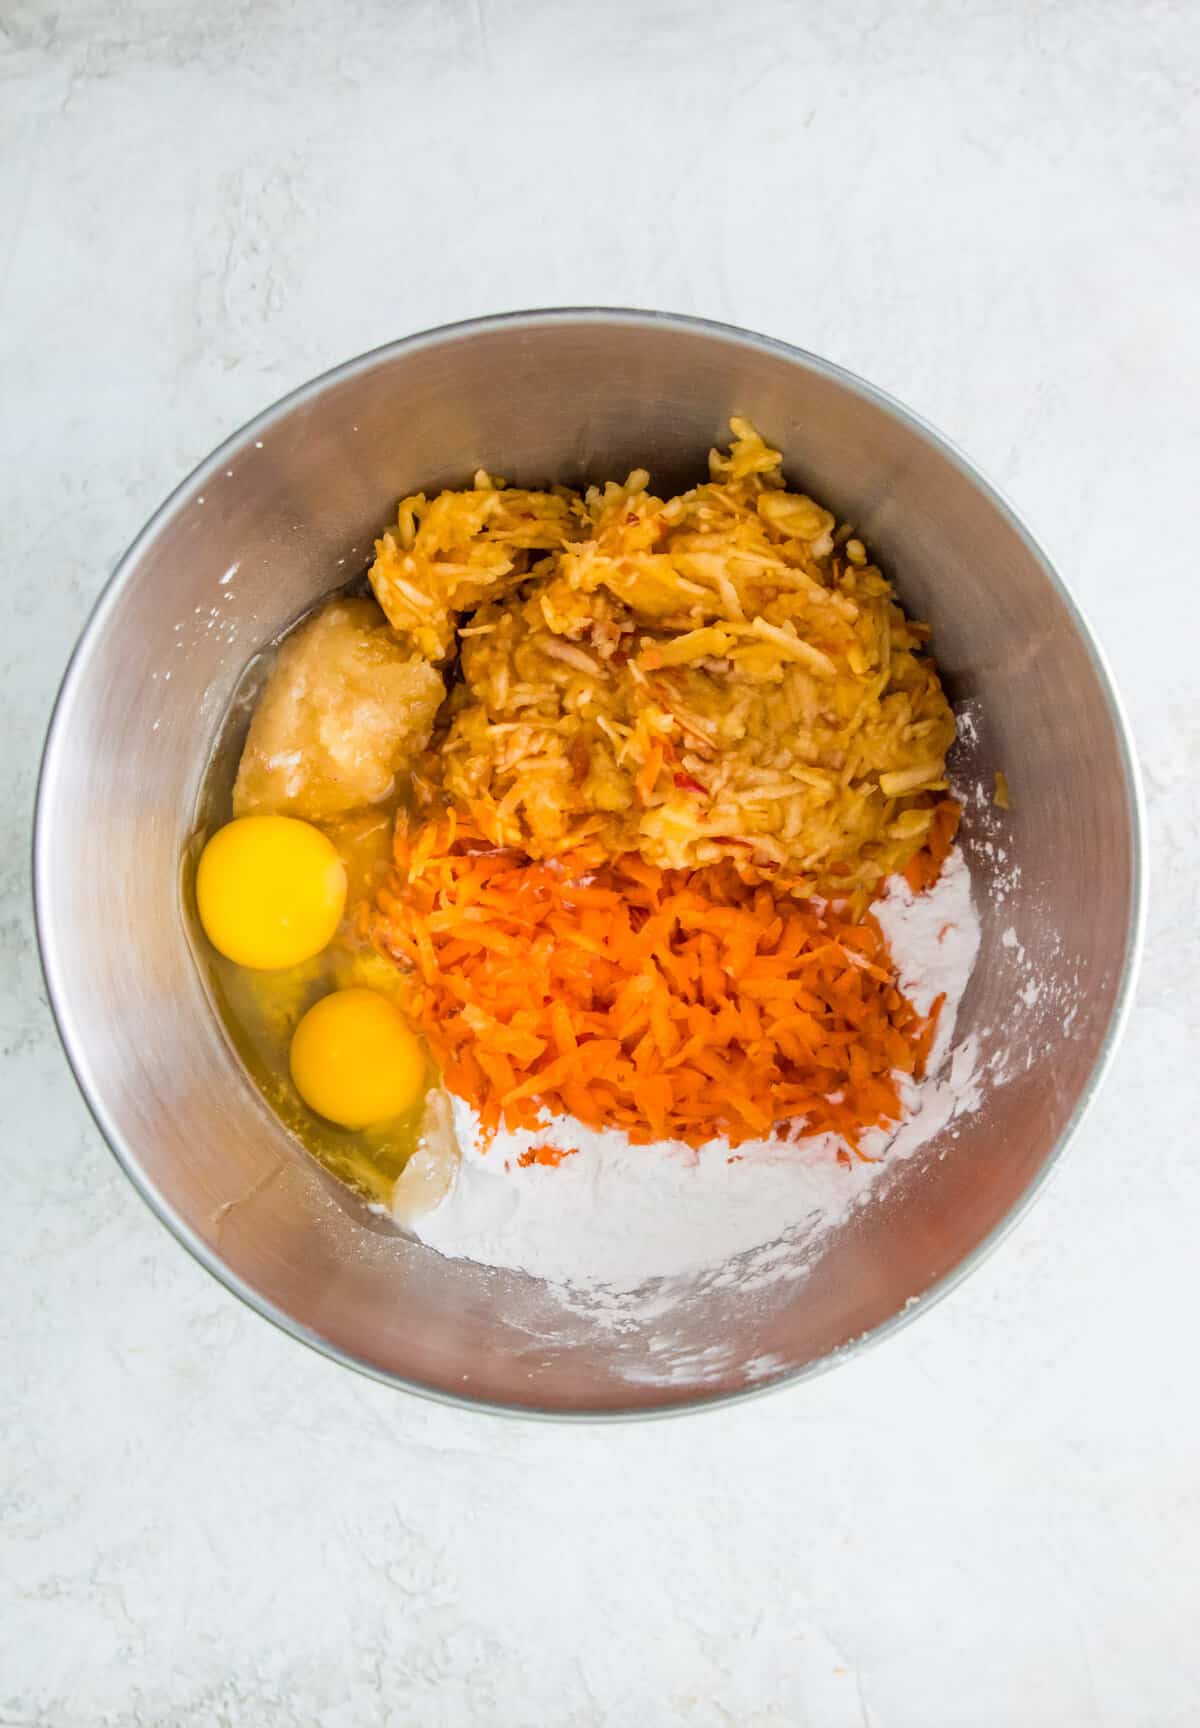 A large stainless steel bowl filled with eggs, shredded carrots, shredded apple, honey and flour.